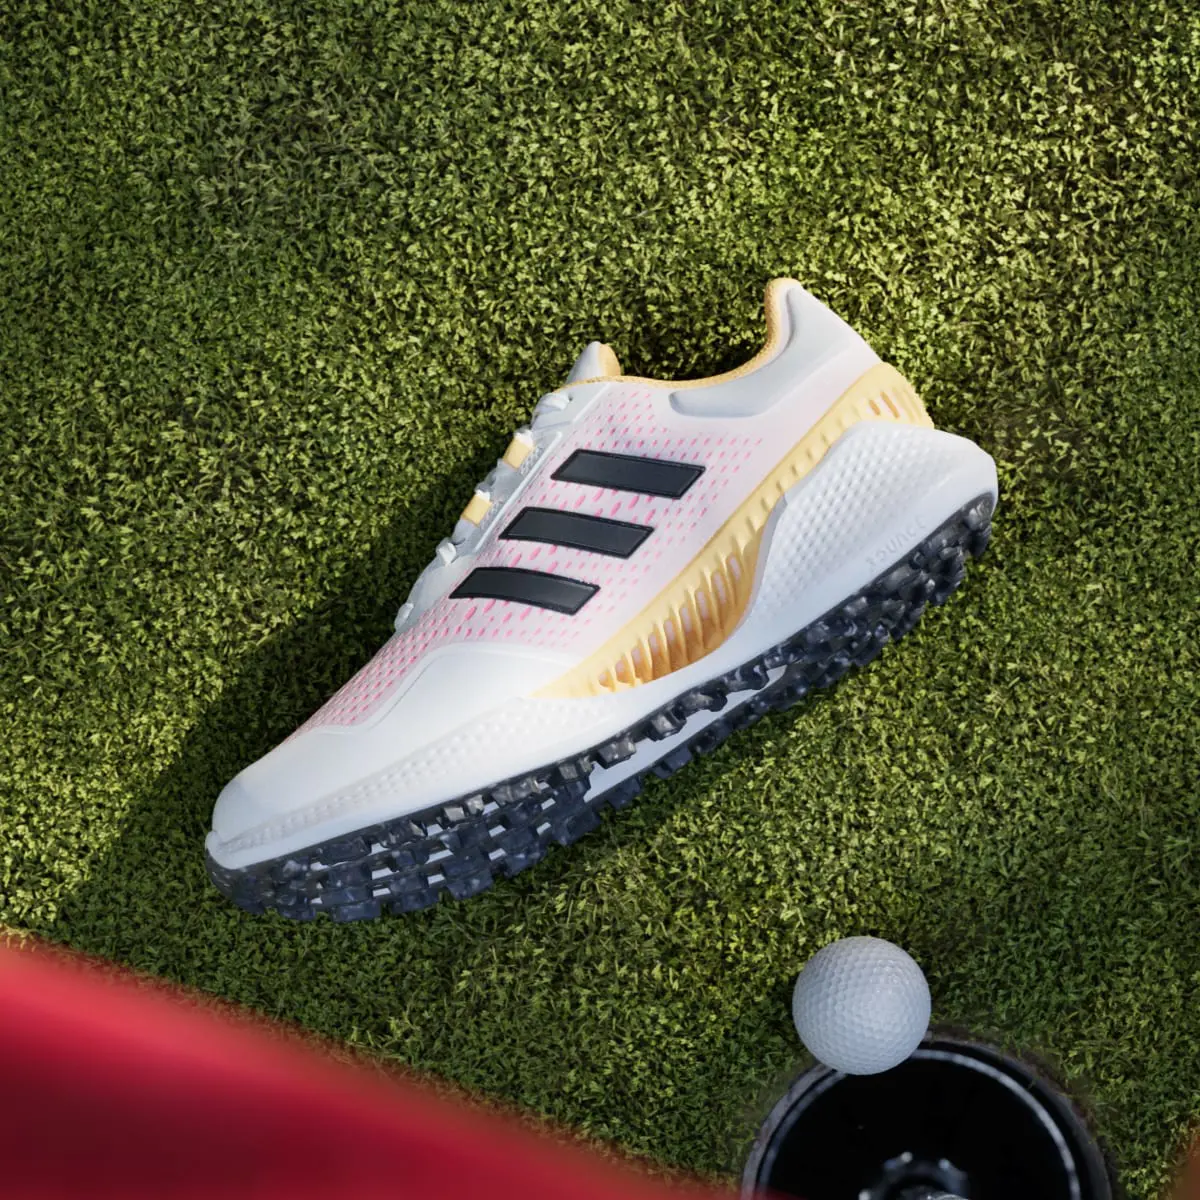 Adidas Summervent 24 Bounce Golf Shoes Low. 2